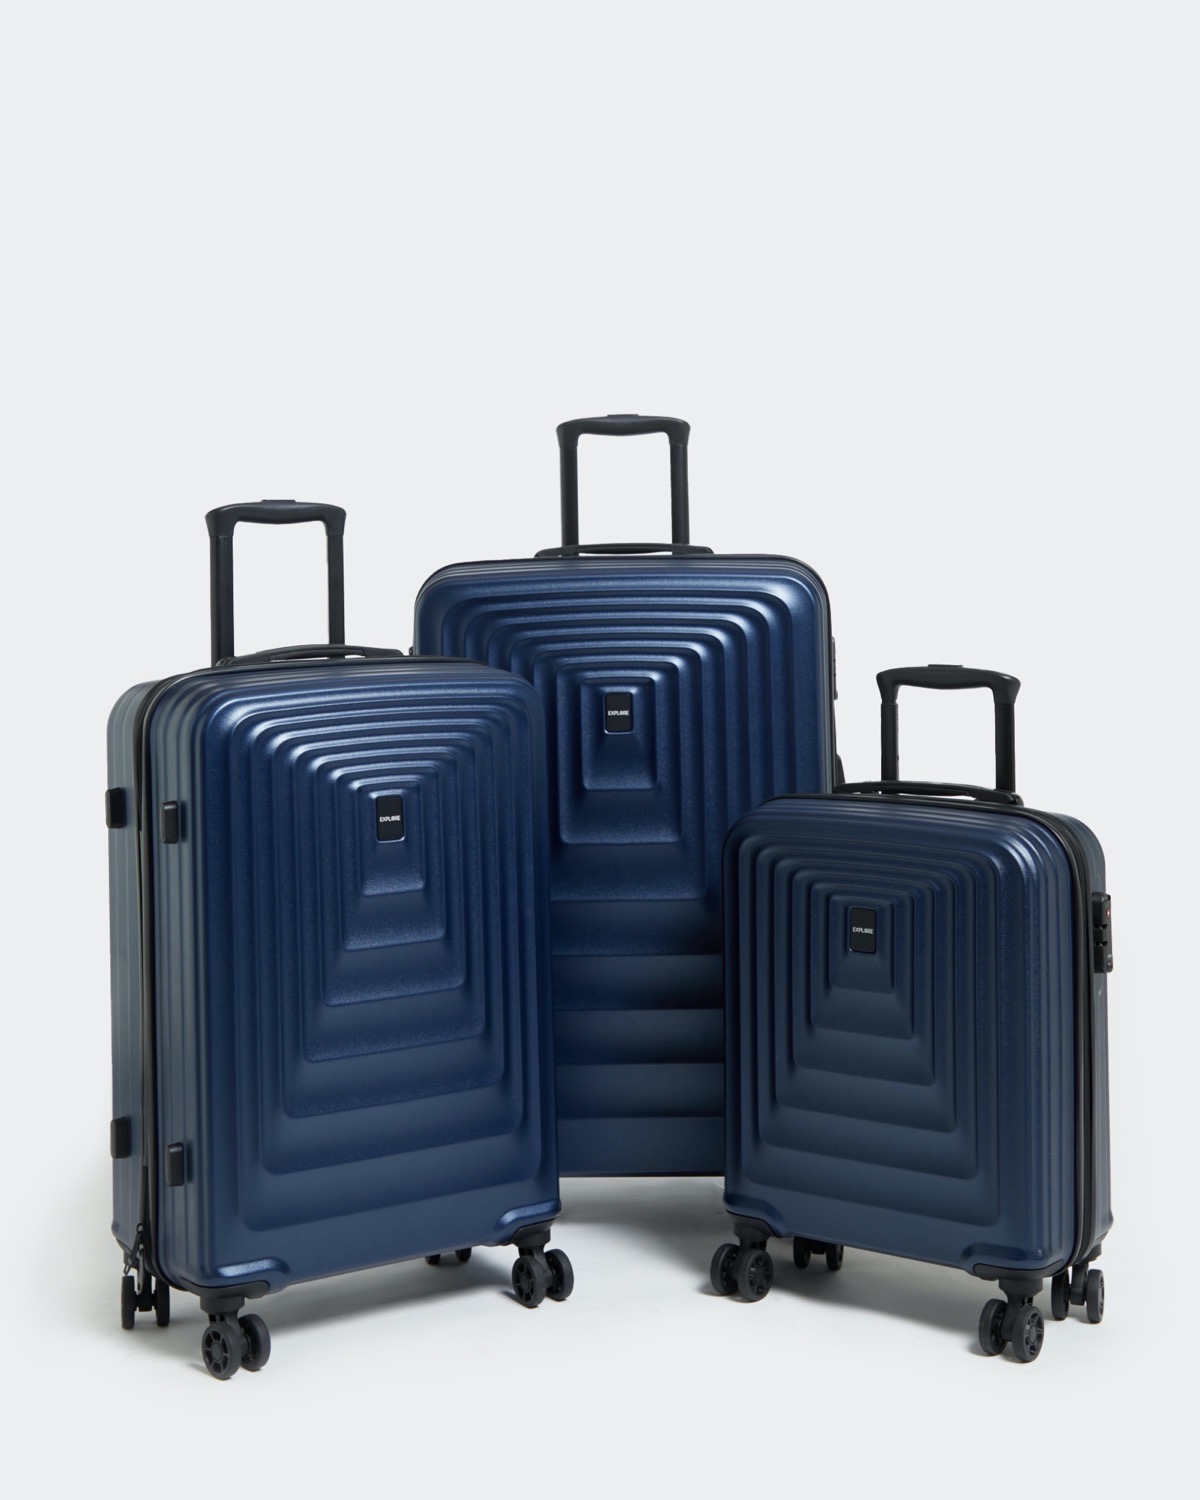 Northix Covers for Suitcase, Countries multifärg S